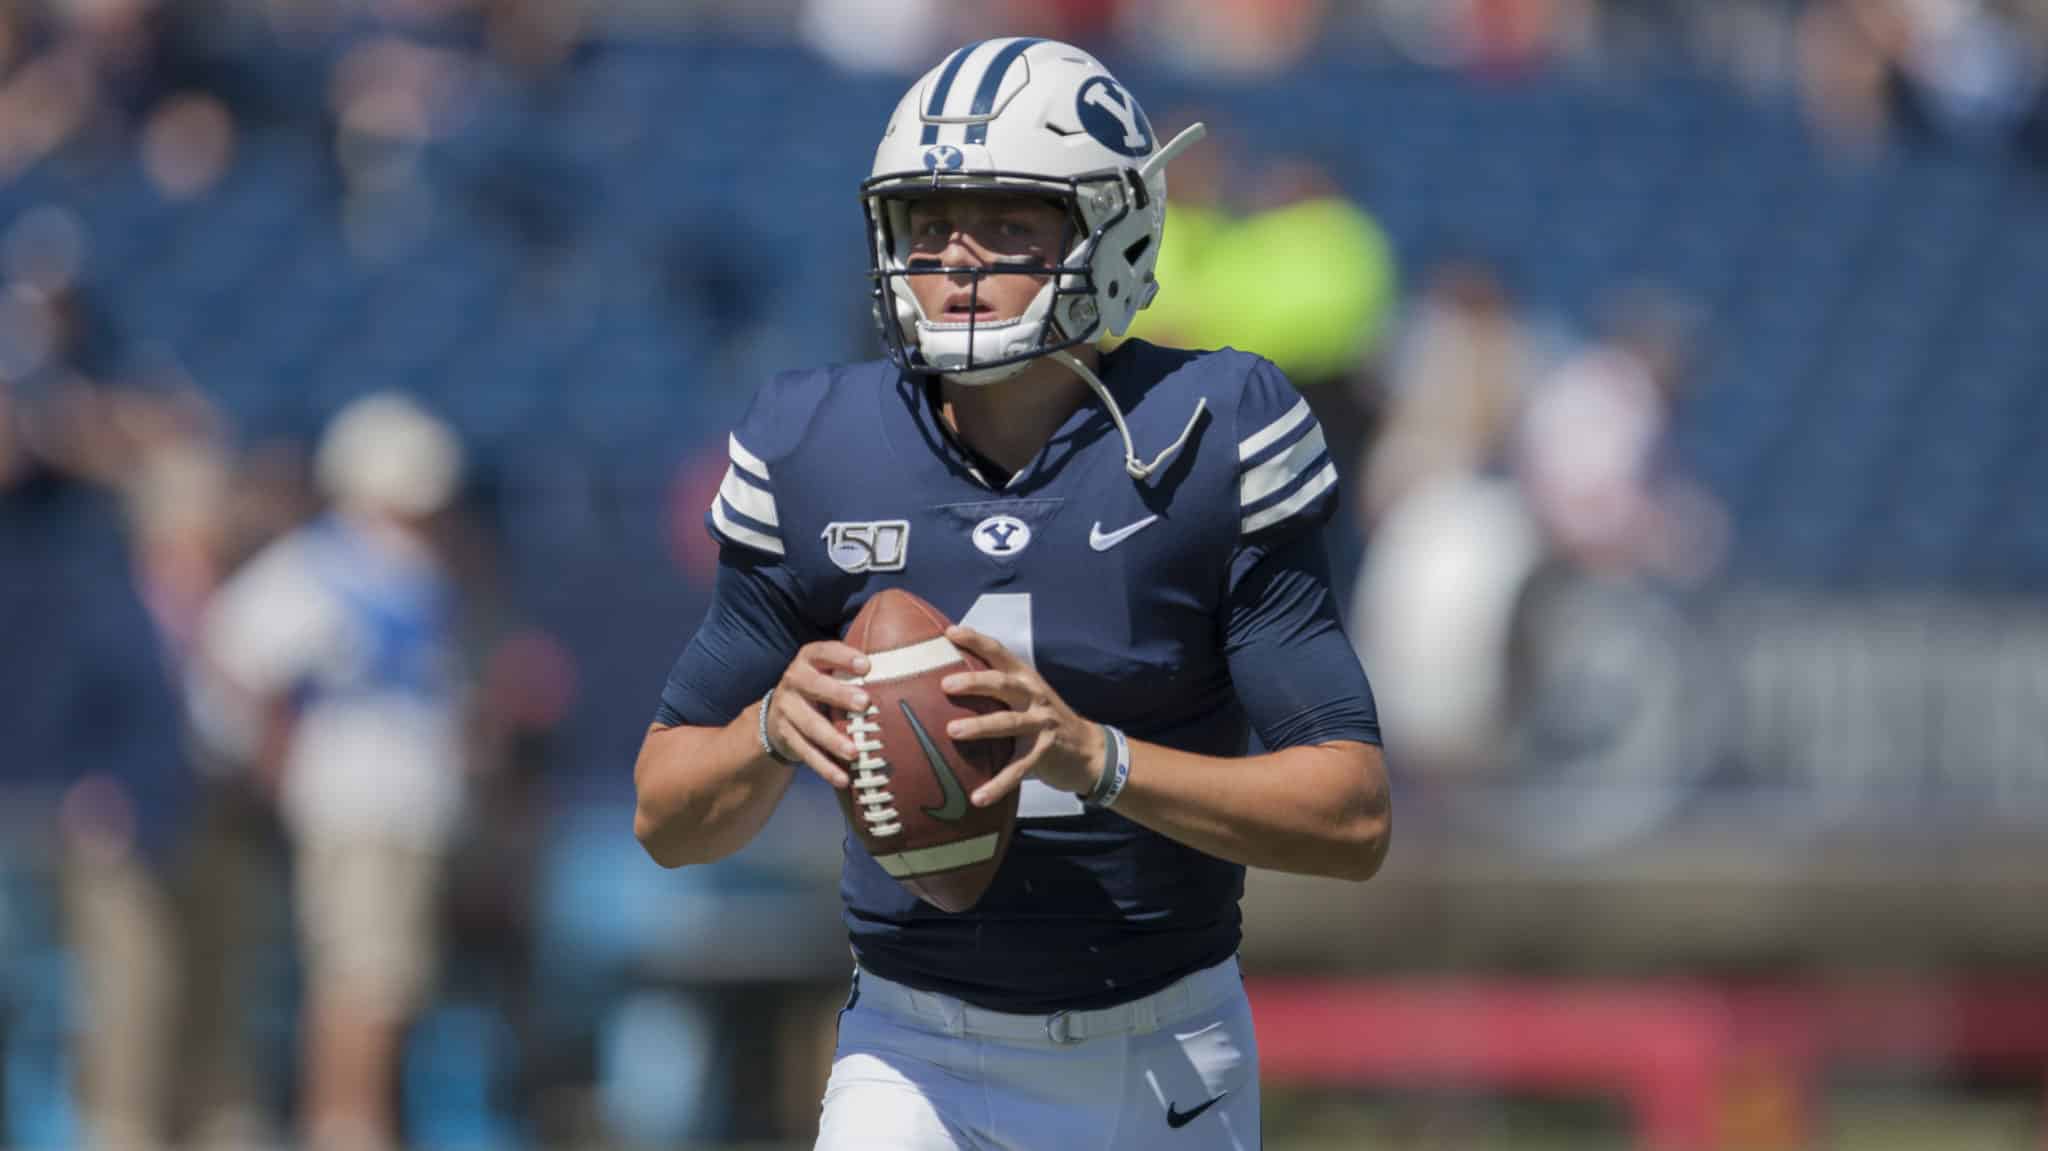 PROVO, UT - SEPTEMBER 14 : Zach Wilson #1 of the BYU Cougars warms up before their game against the USC Trojans at LaVell Edwards Stadium on September 14, in Provo, Utah.